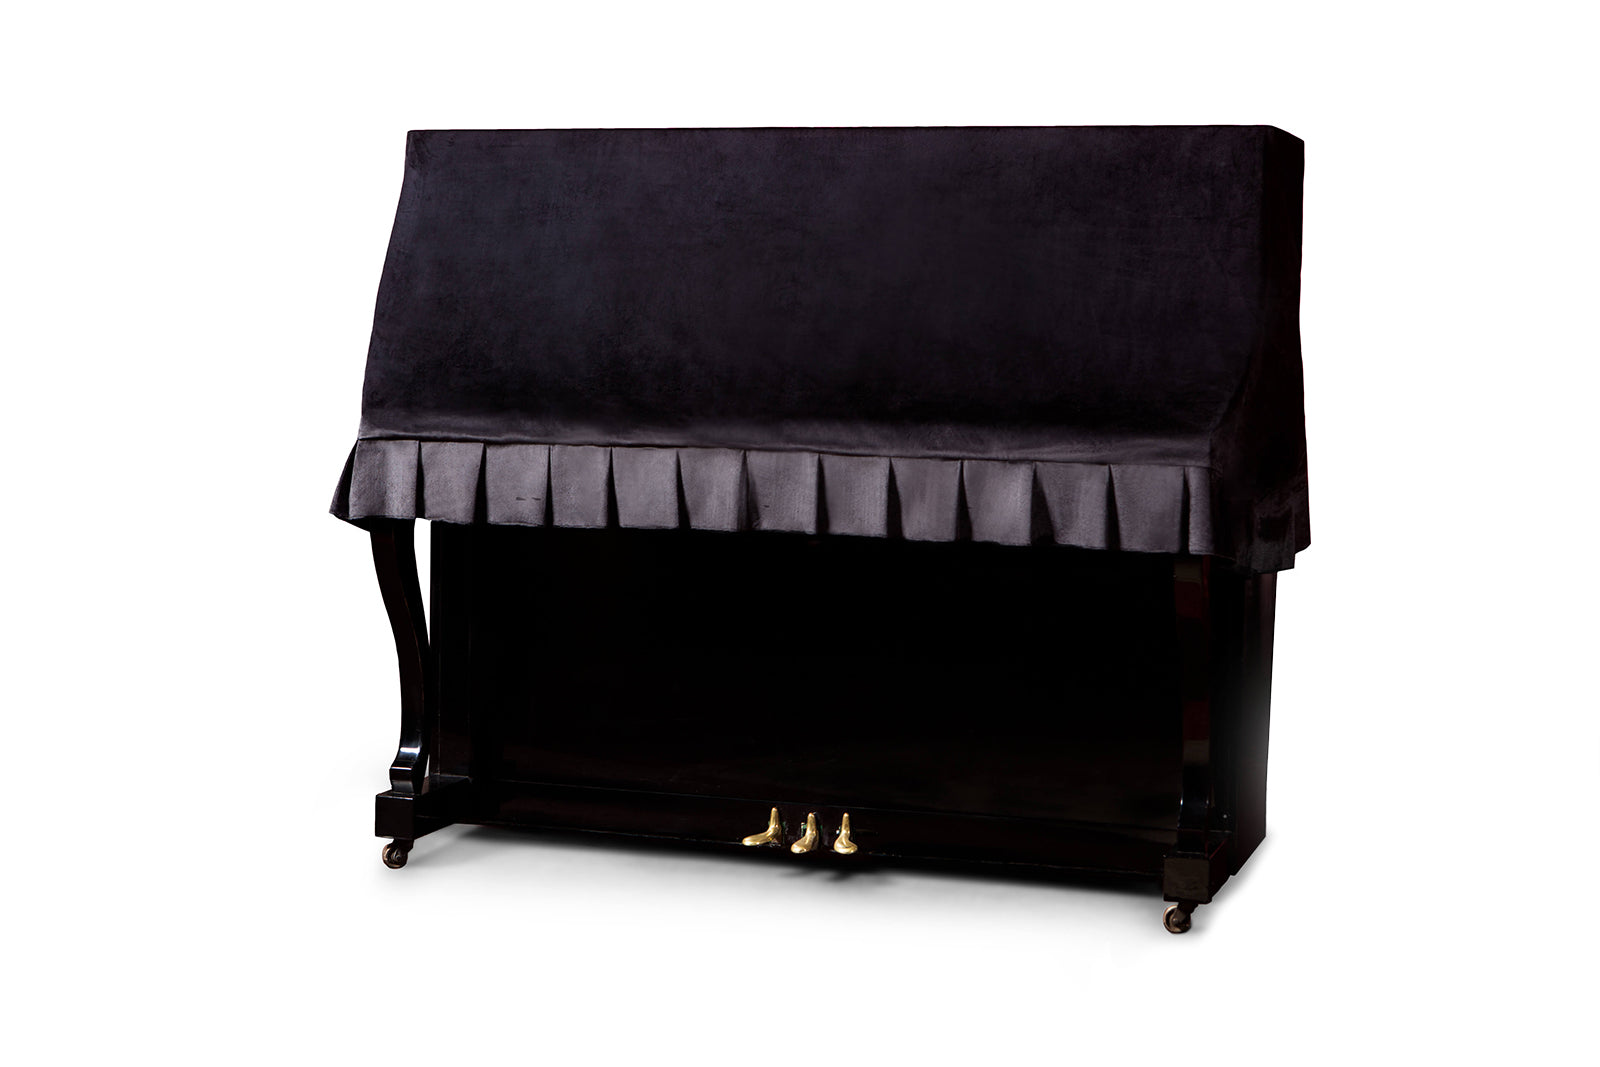 Upright Piano Covers